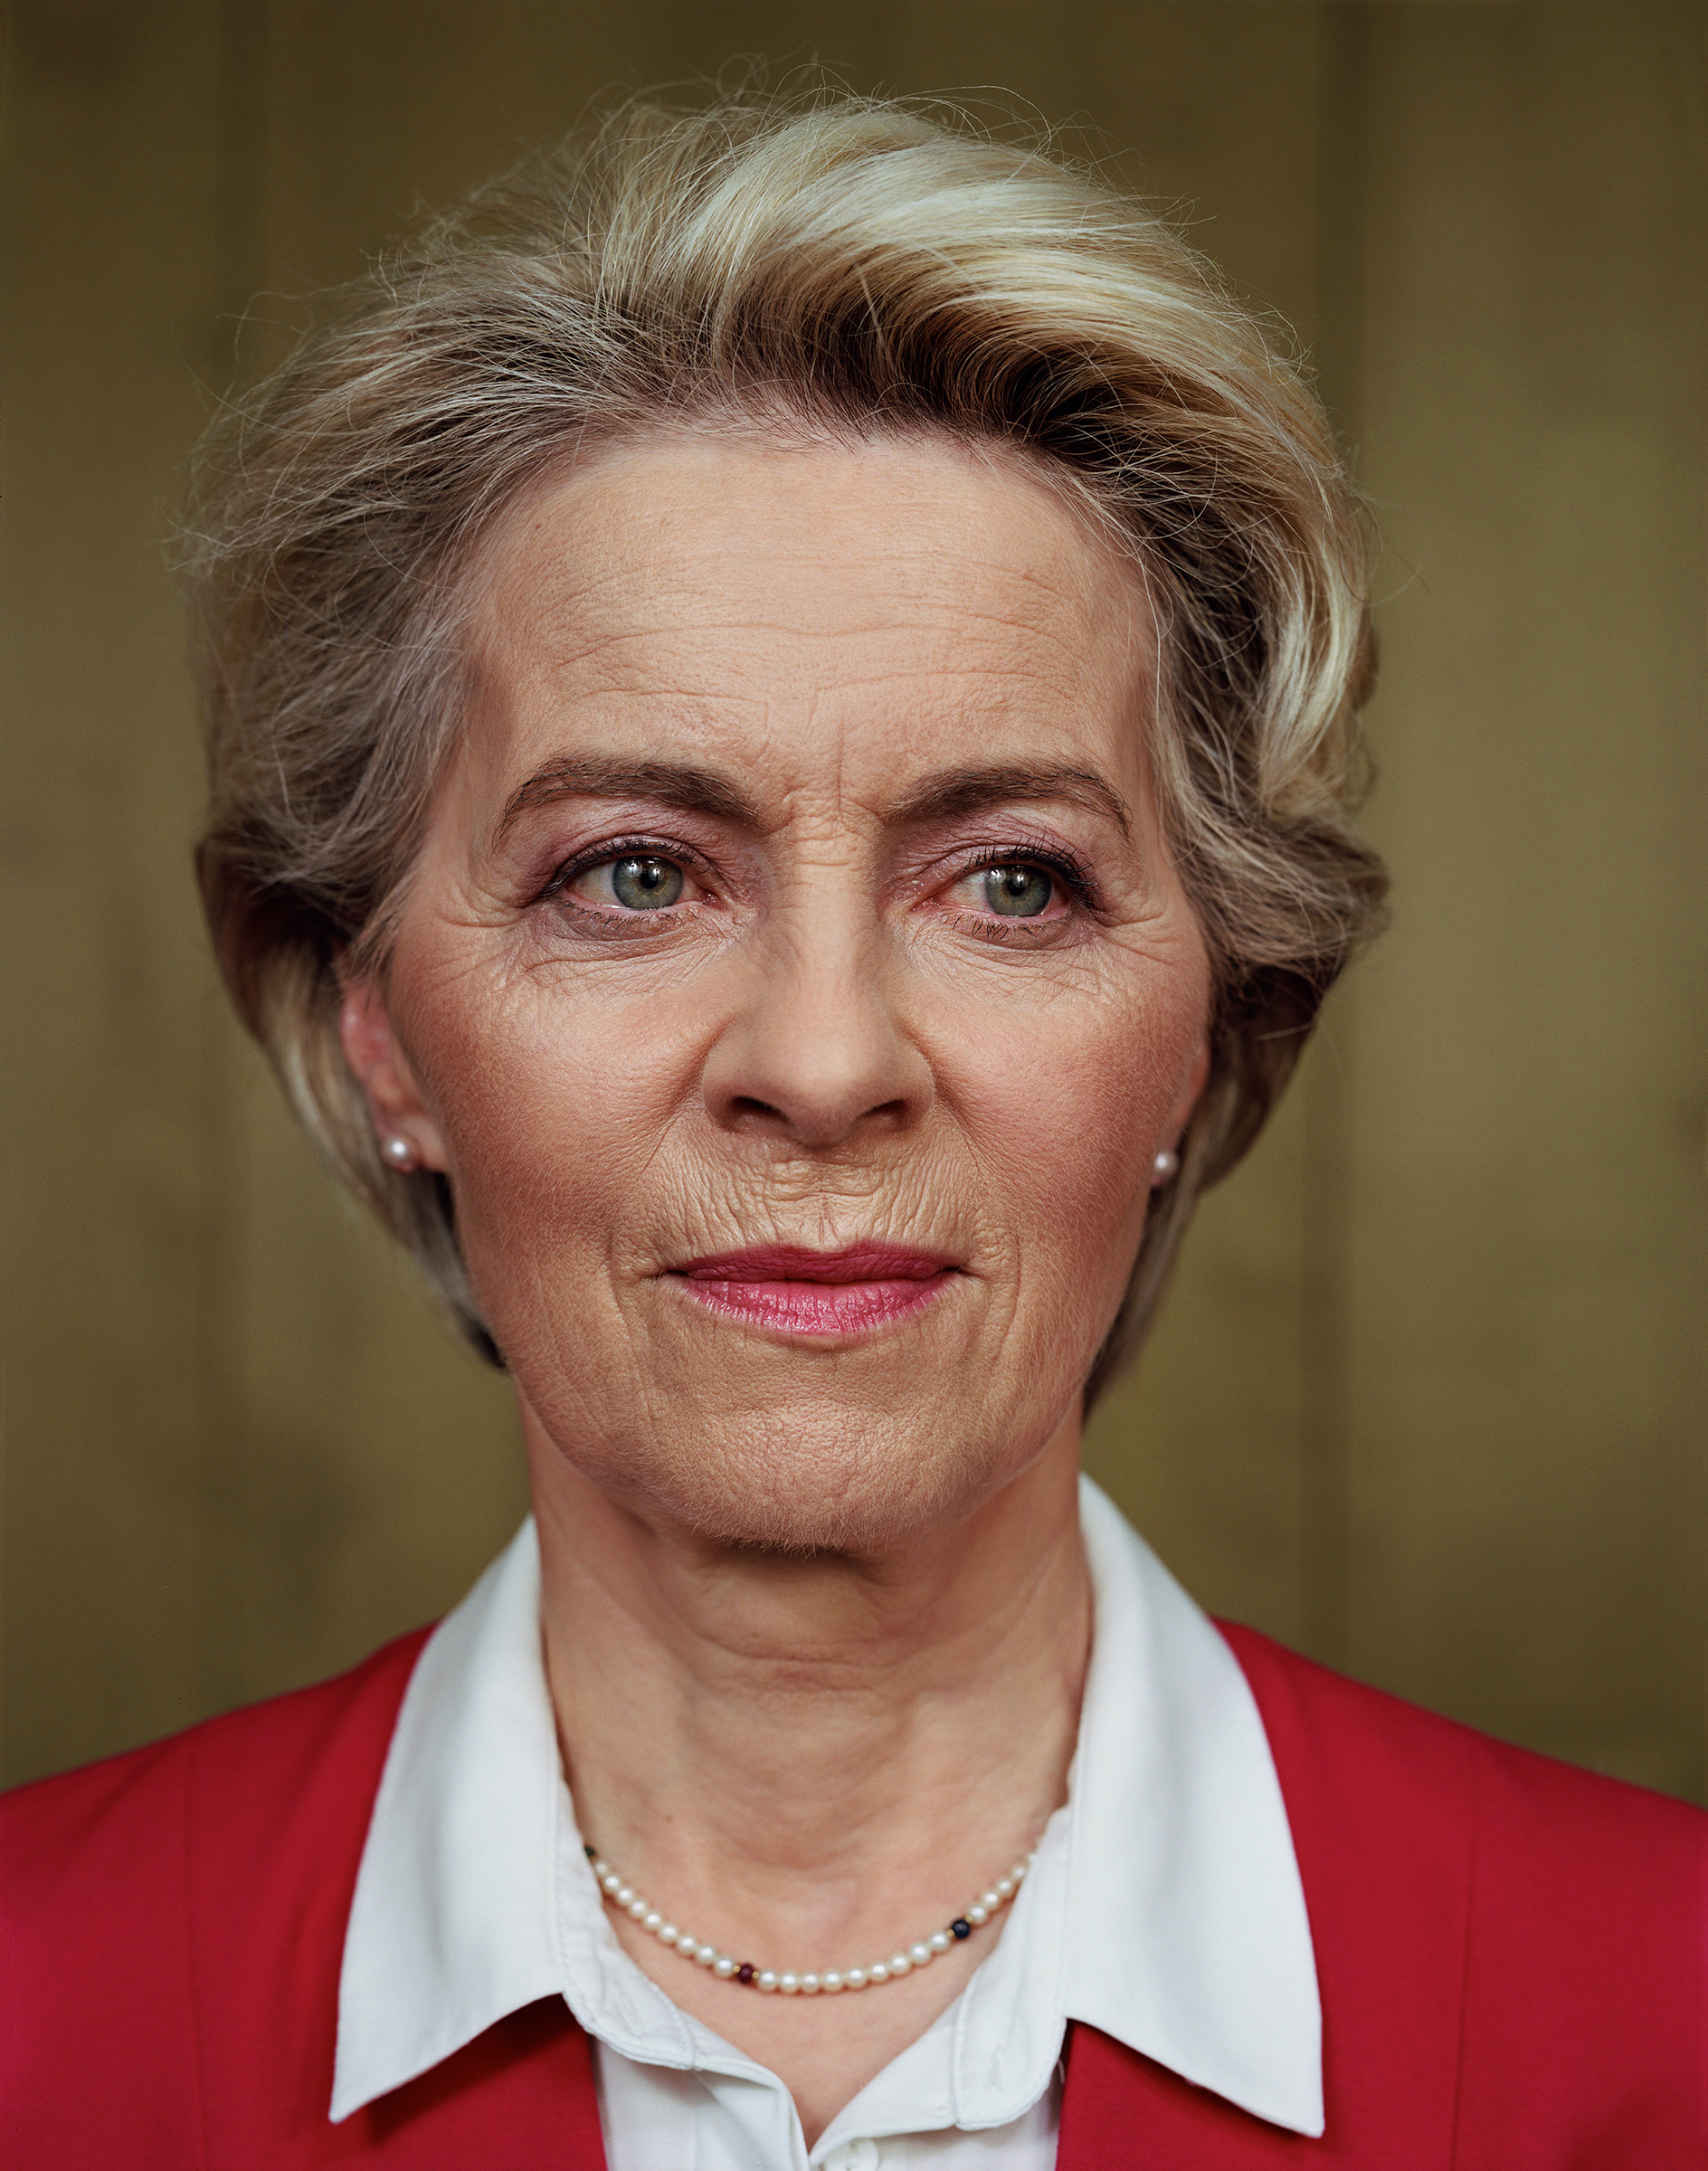 President Ursula von der Leyen at the European Commission headquarters in Brussels on May 27 (Dana Lixenberg for TIME)